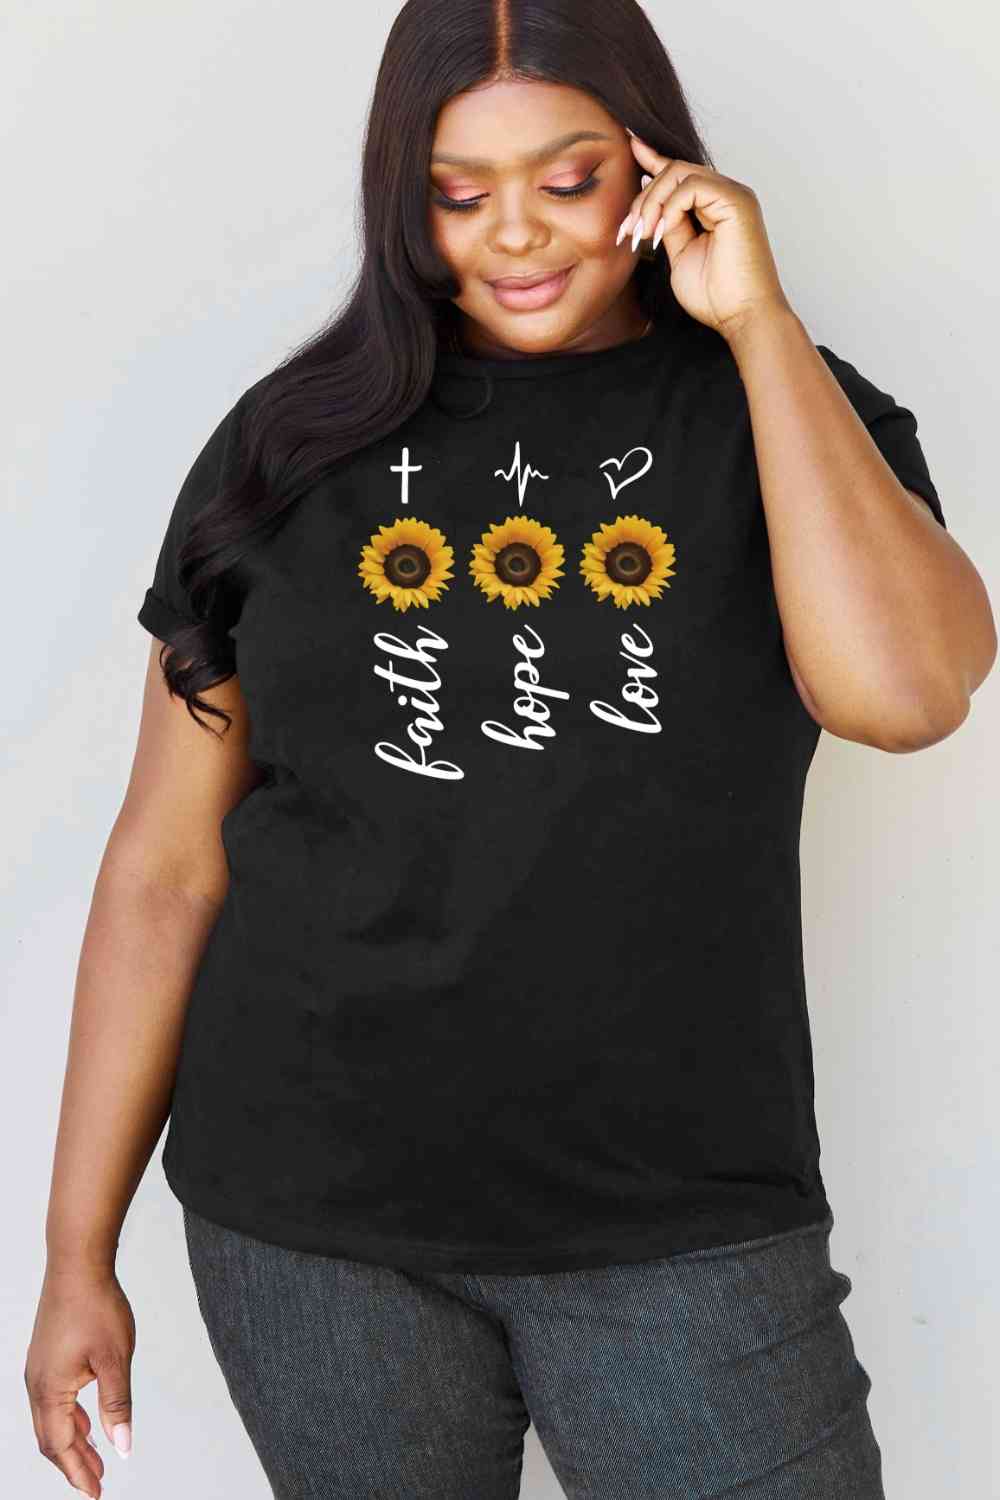 Simply Love Full Size Sunflower Graphic T-Shirt BLUE ZONE PLANET